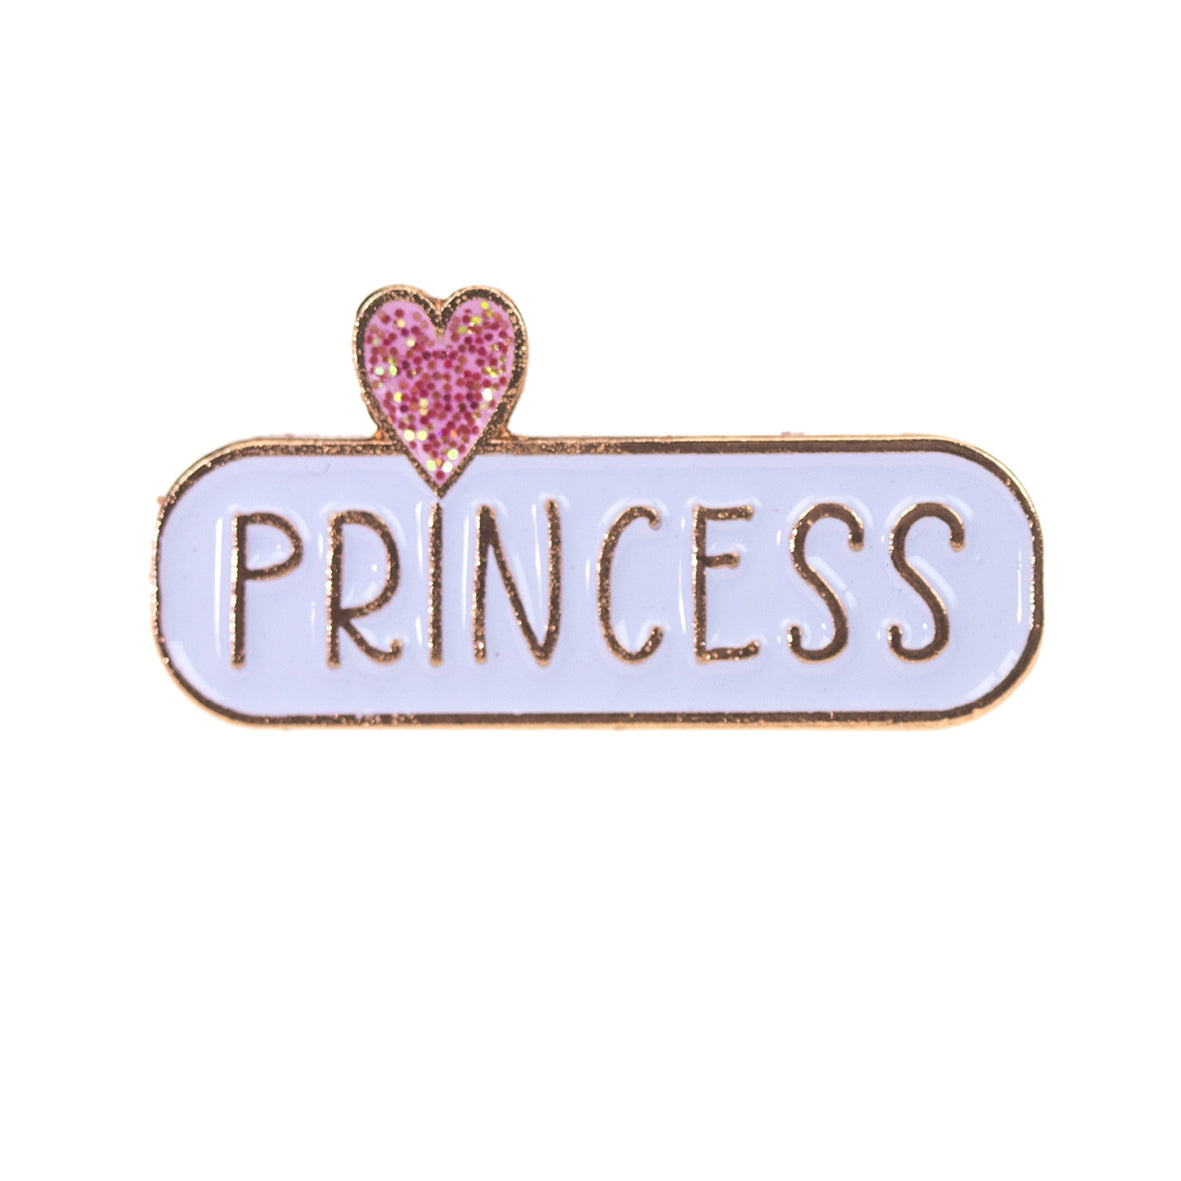 The Handcrafted Card Company Prosecco Princess Birthday Badge Card